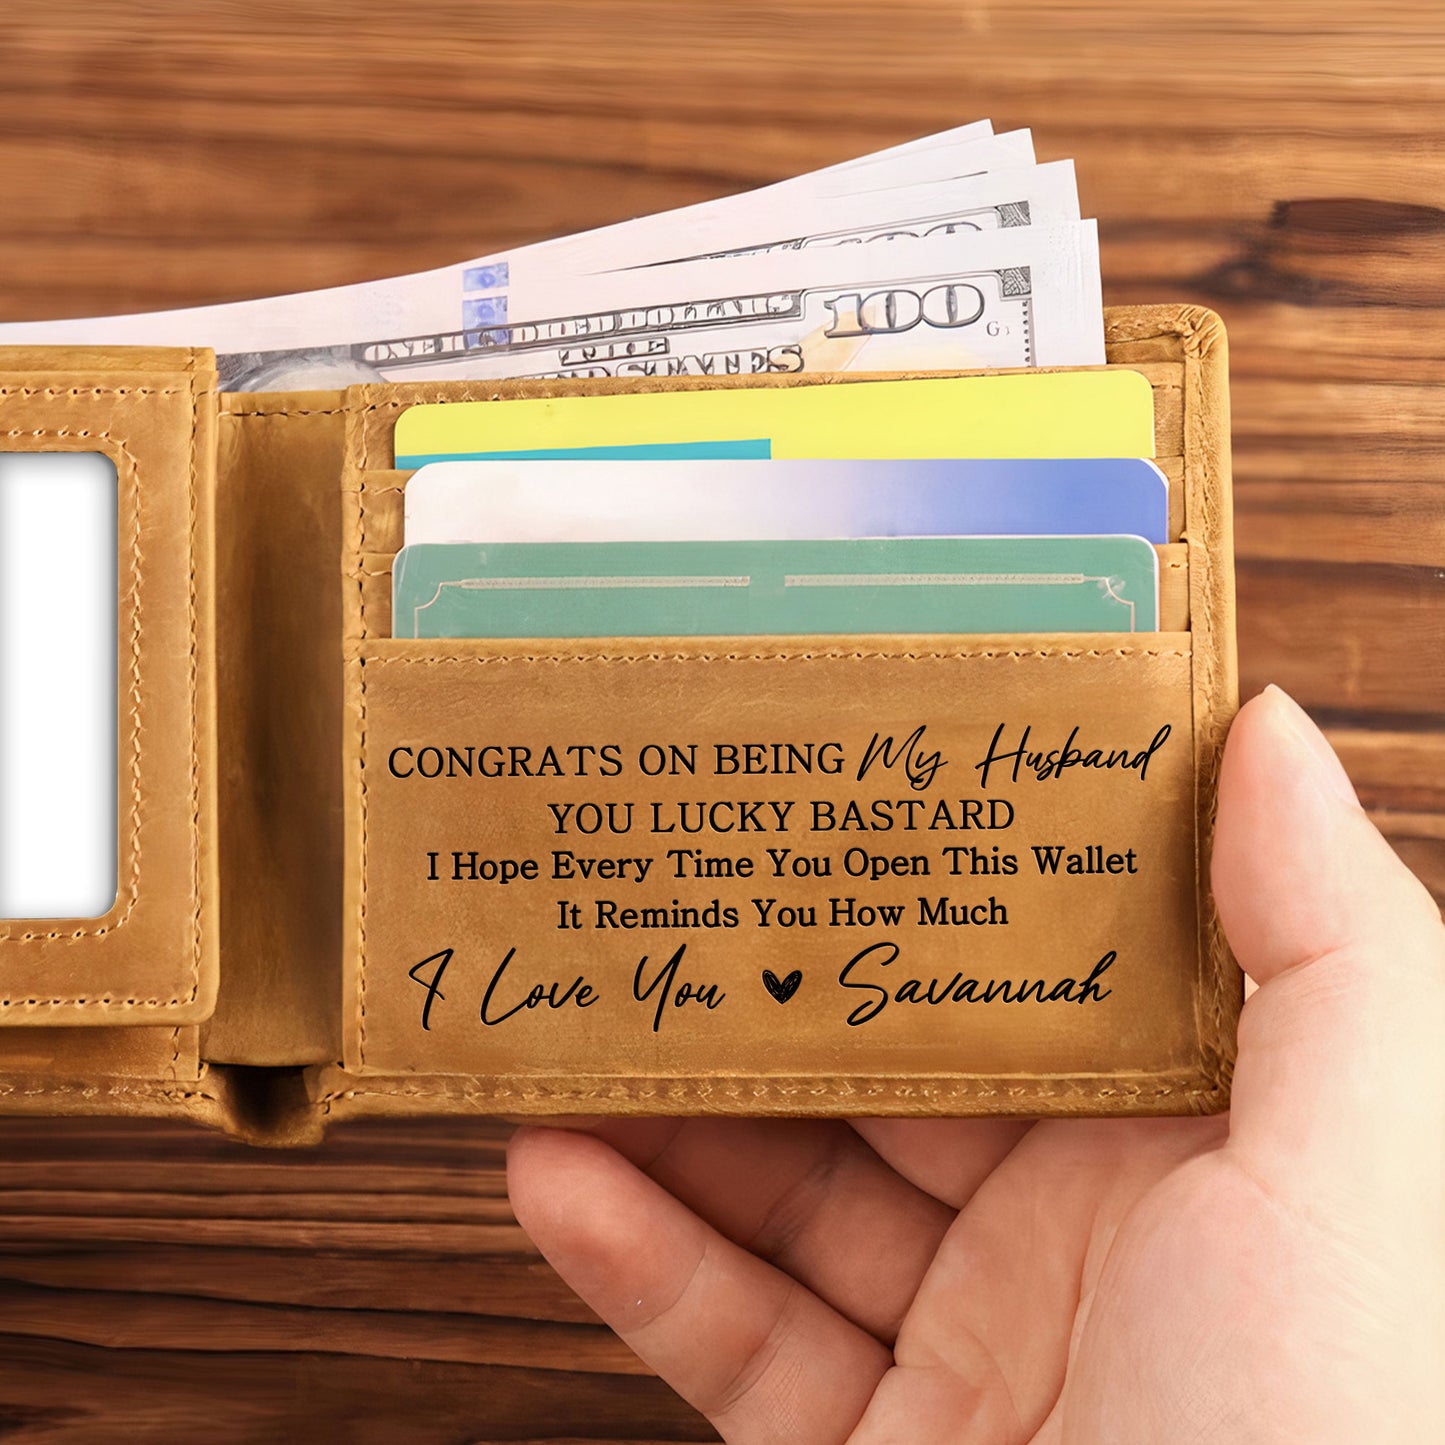 Congrats On Being My Husband You Lucky Bastard - Personalized Leather Wallet